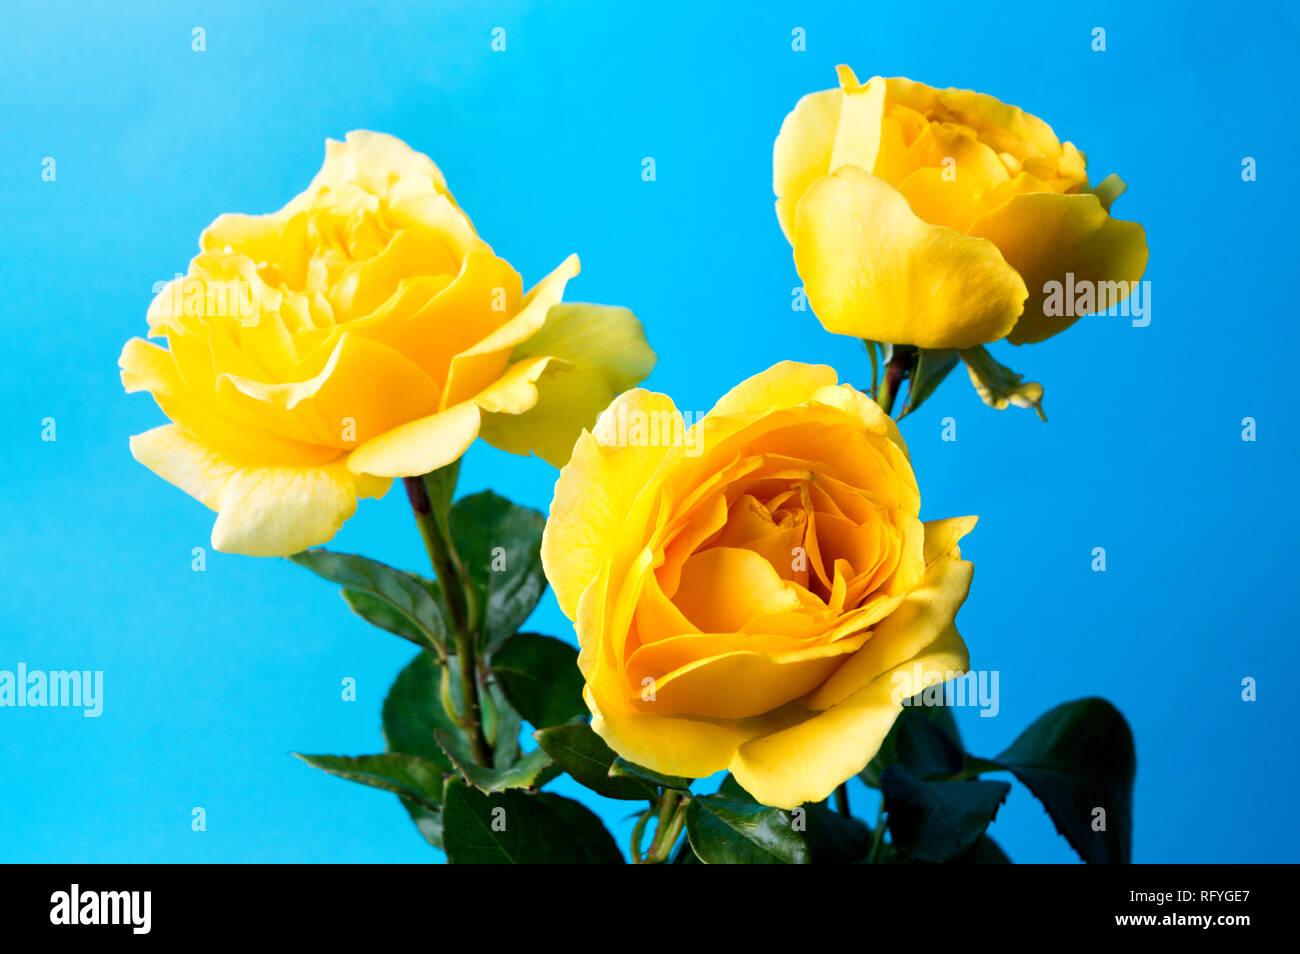 Yellow roses against a turquoise blue background Stock Photo